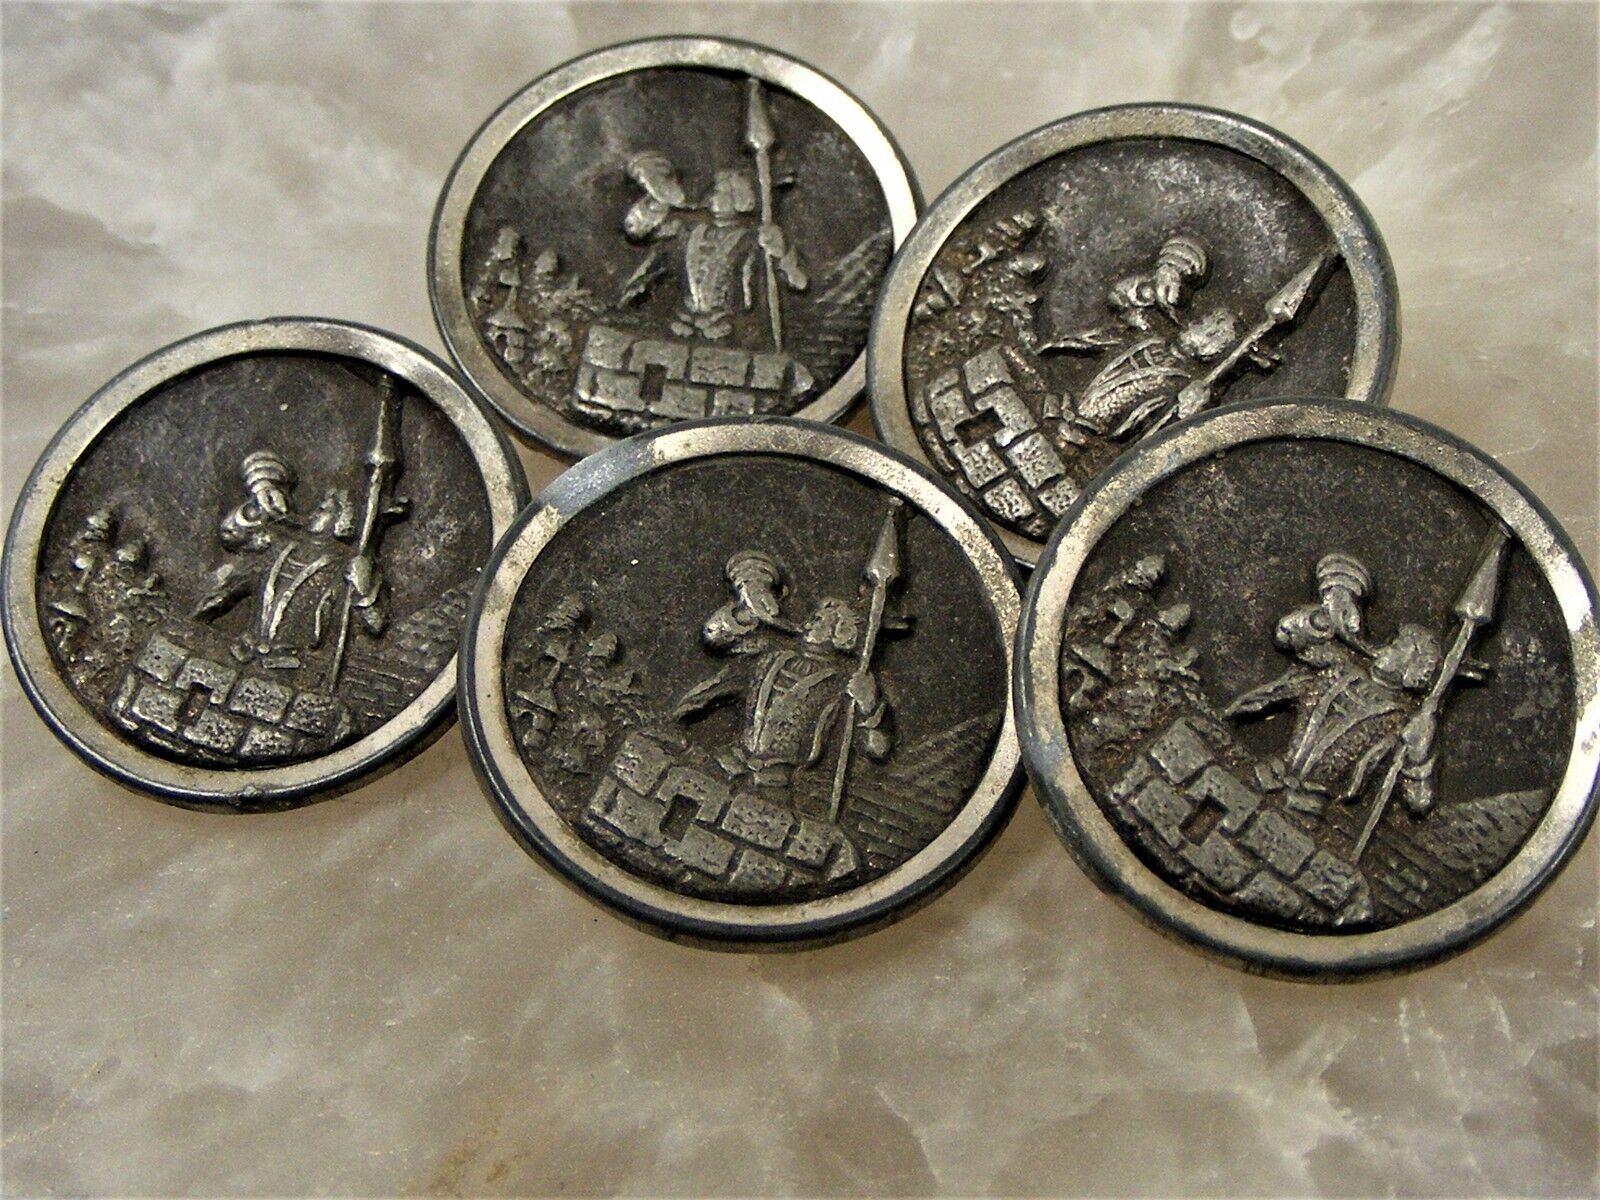 Antique Brass & Pewter Coat Story Book BUTTON Lot o 5 Soldier Castle Wall Spear  Без бренда - фотография #3